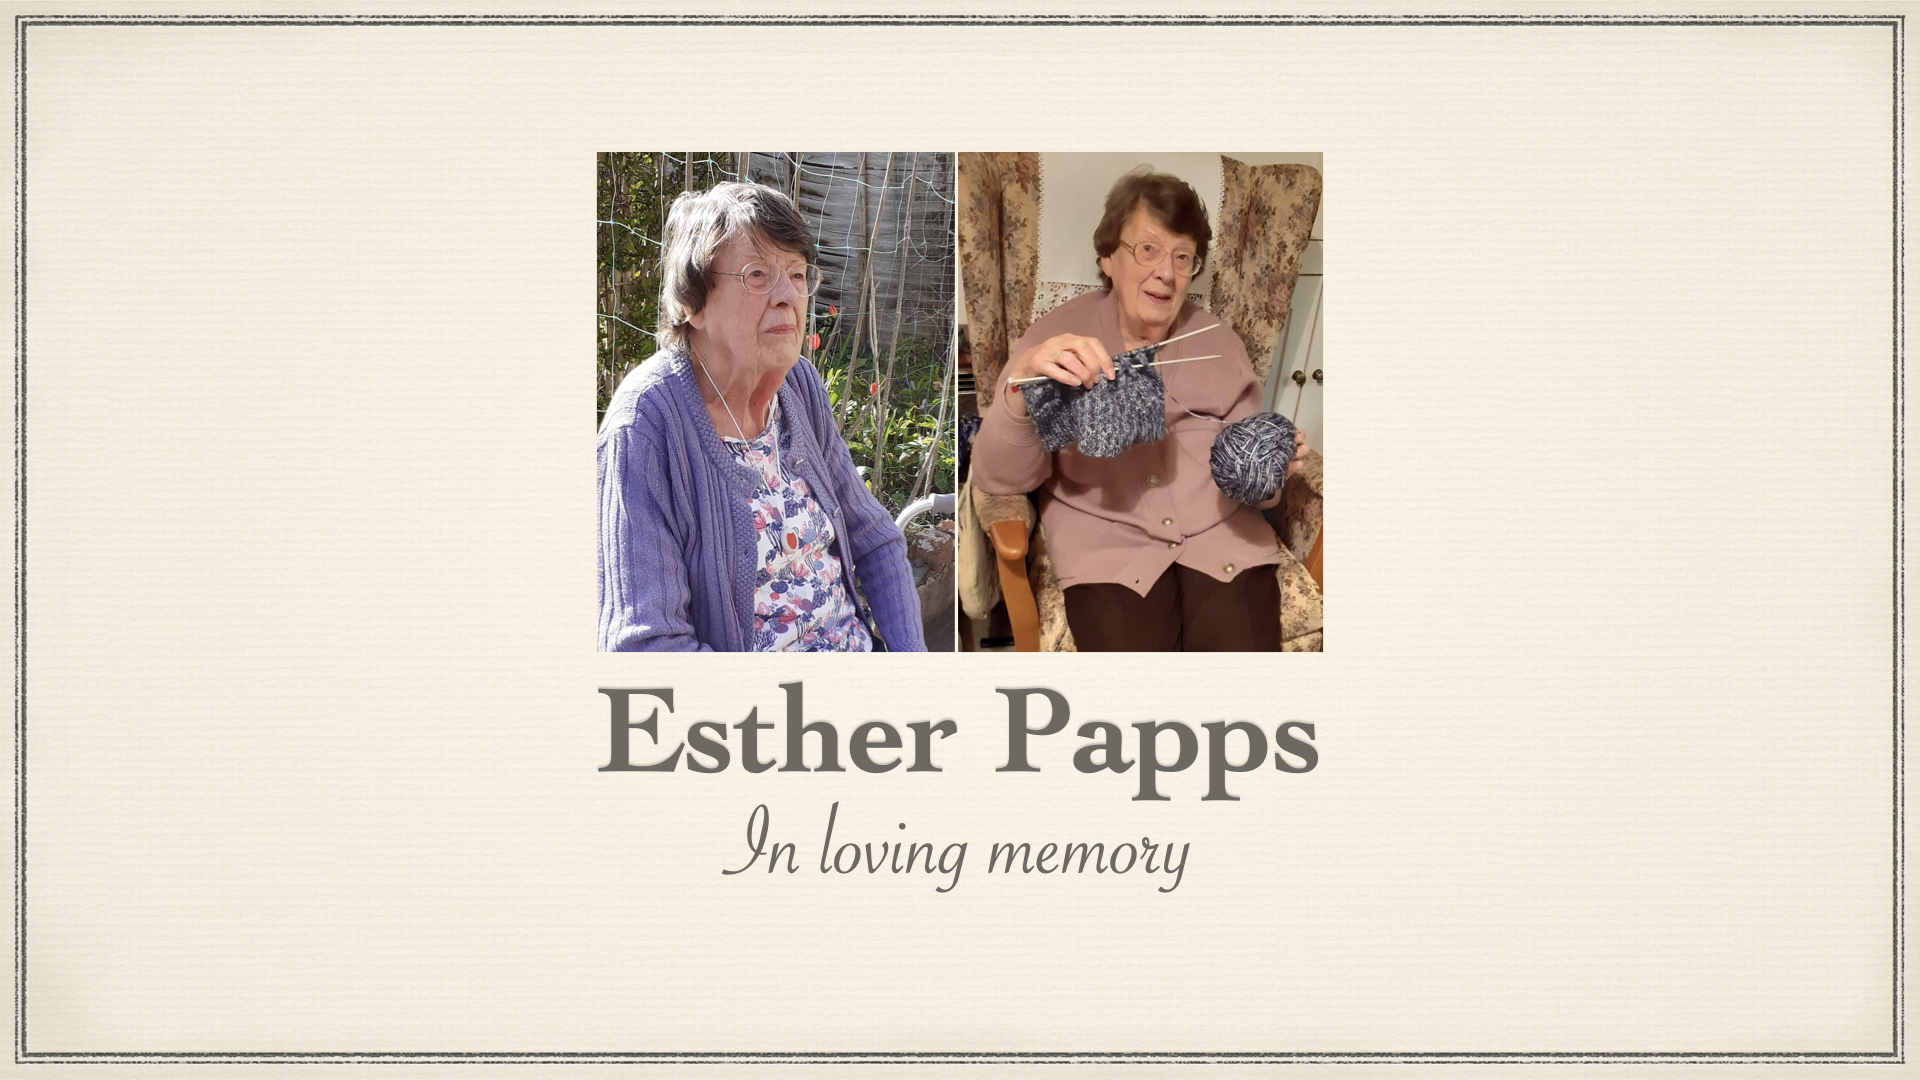 Funeral of Esther Papps – Wednesday 20th December at 11:30am